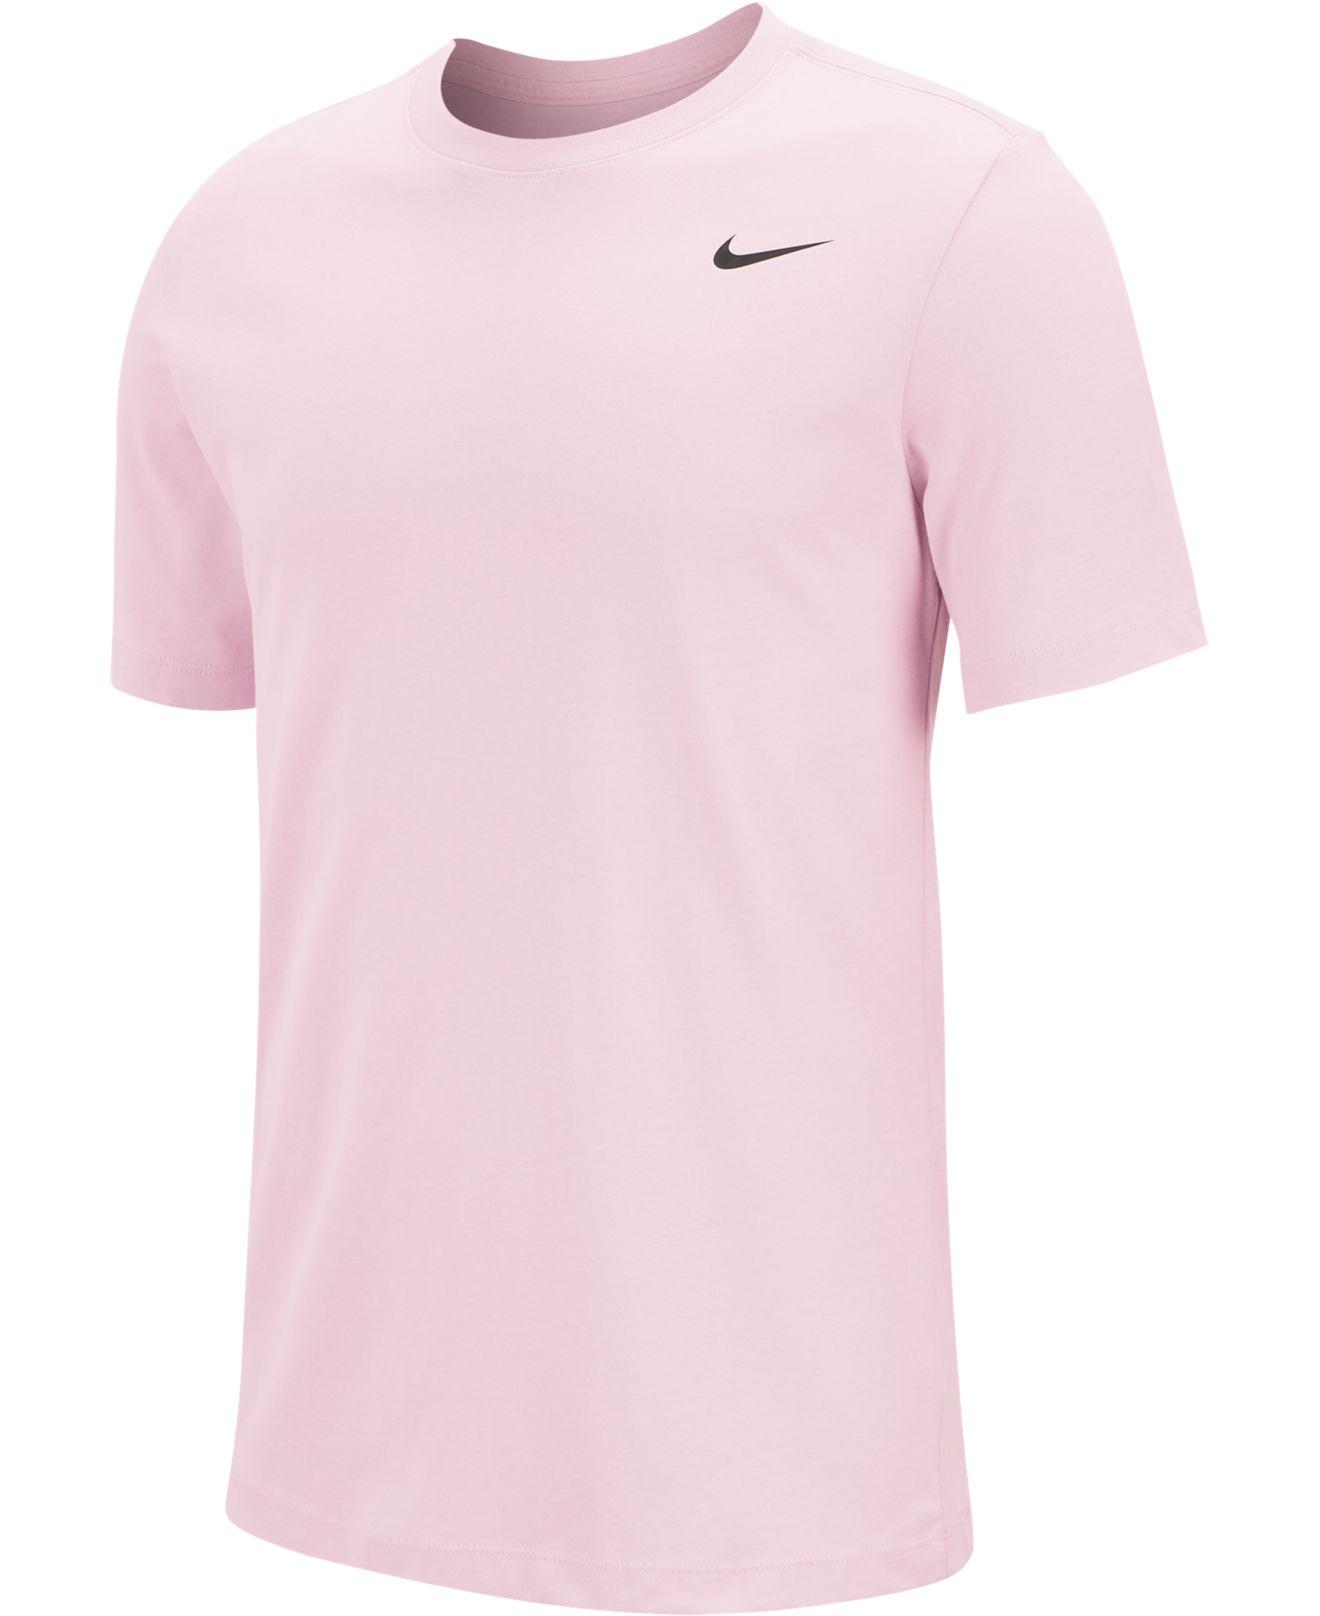 Nike Synthetic Dry Tee Dri-fittm Cotton Crew Solid (pink Foam/pale Pink/black)  T Shirt for Men | Lyst